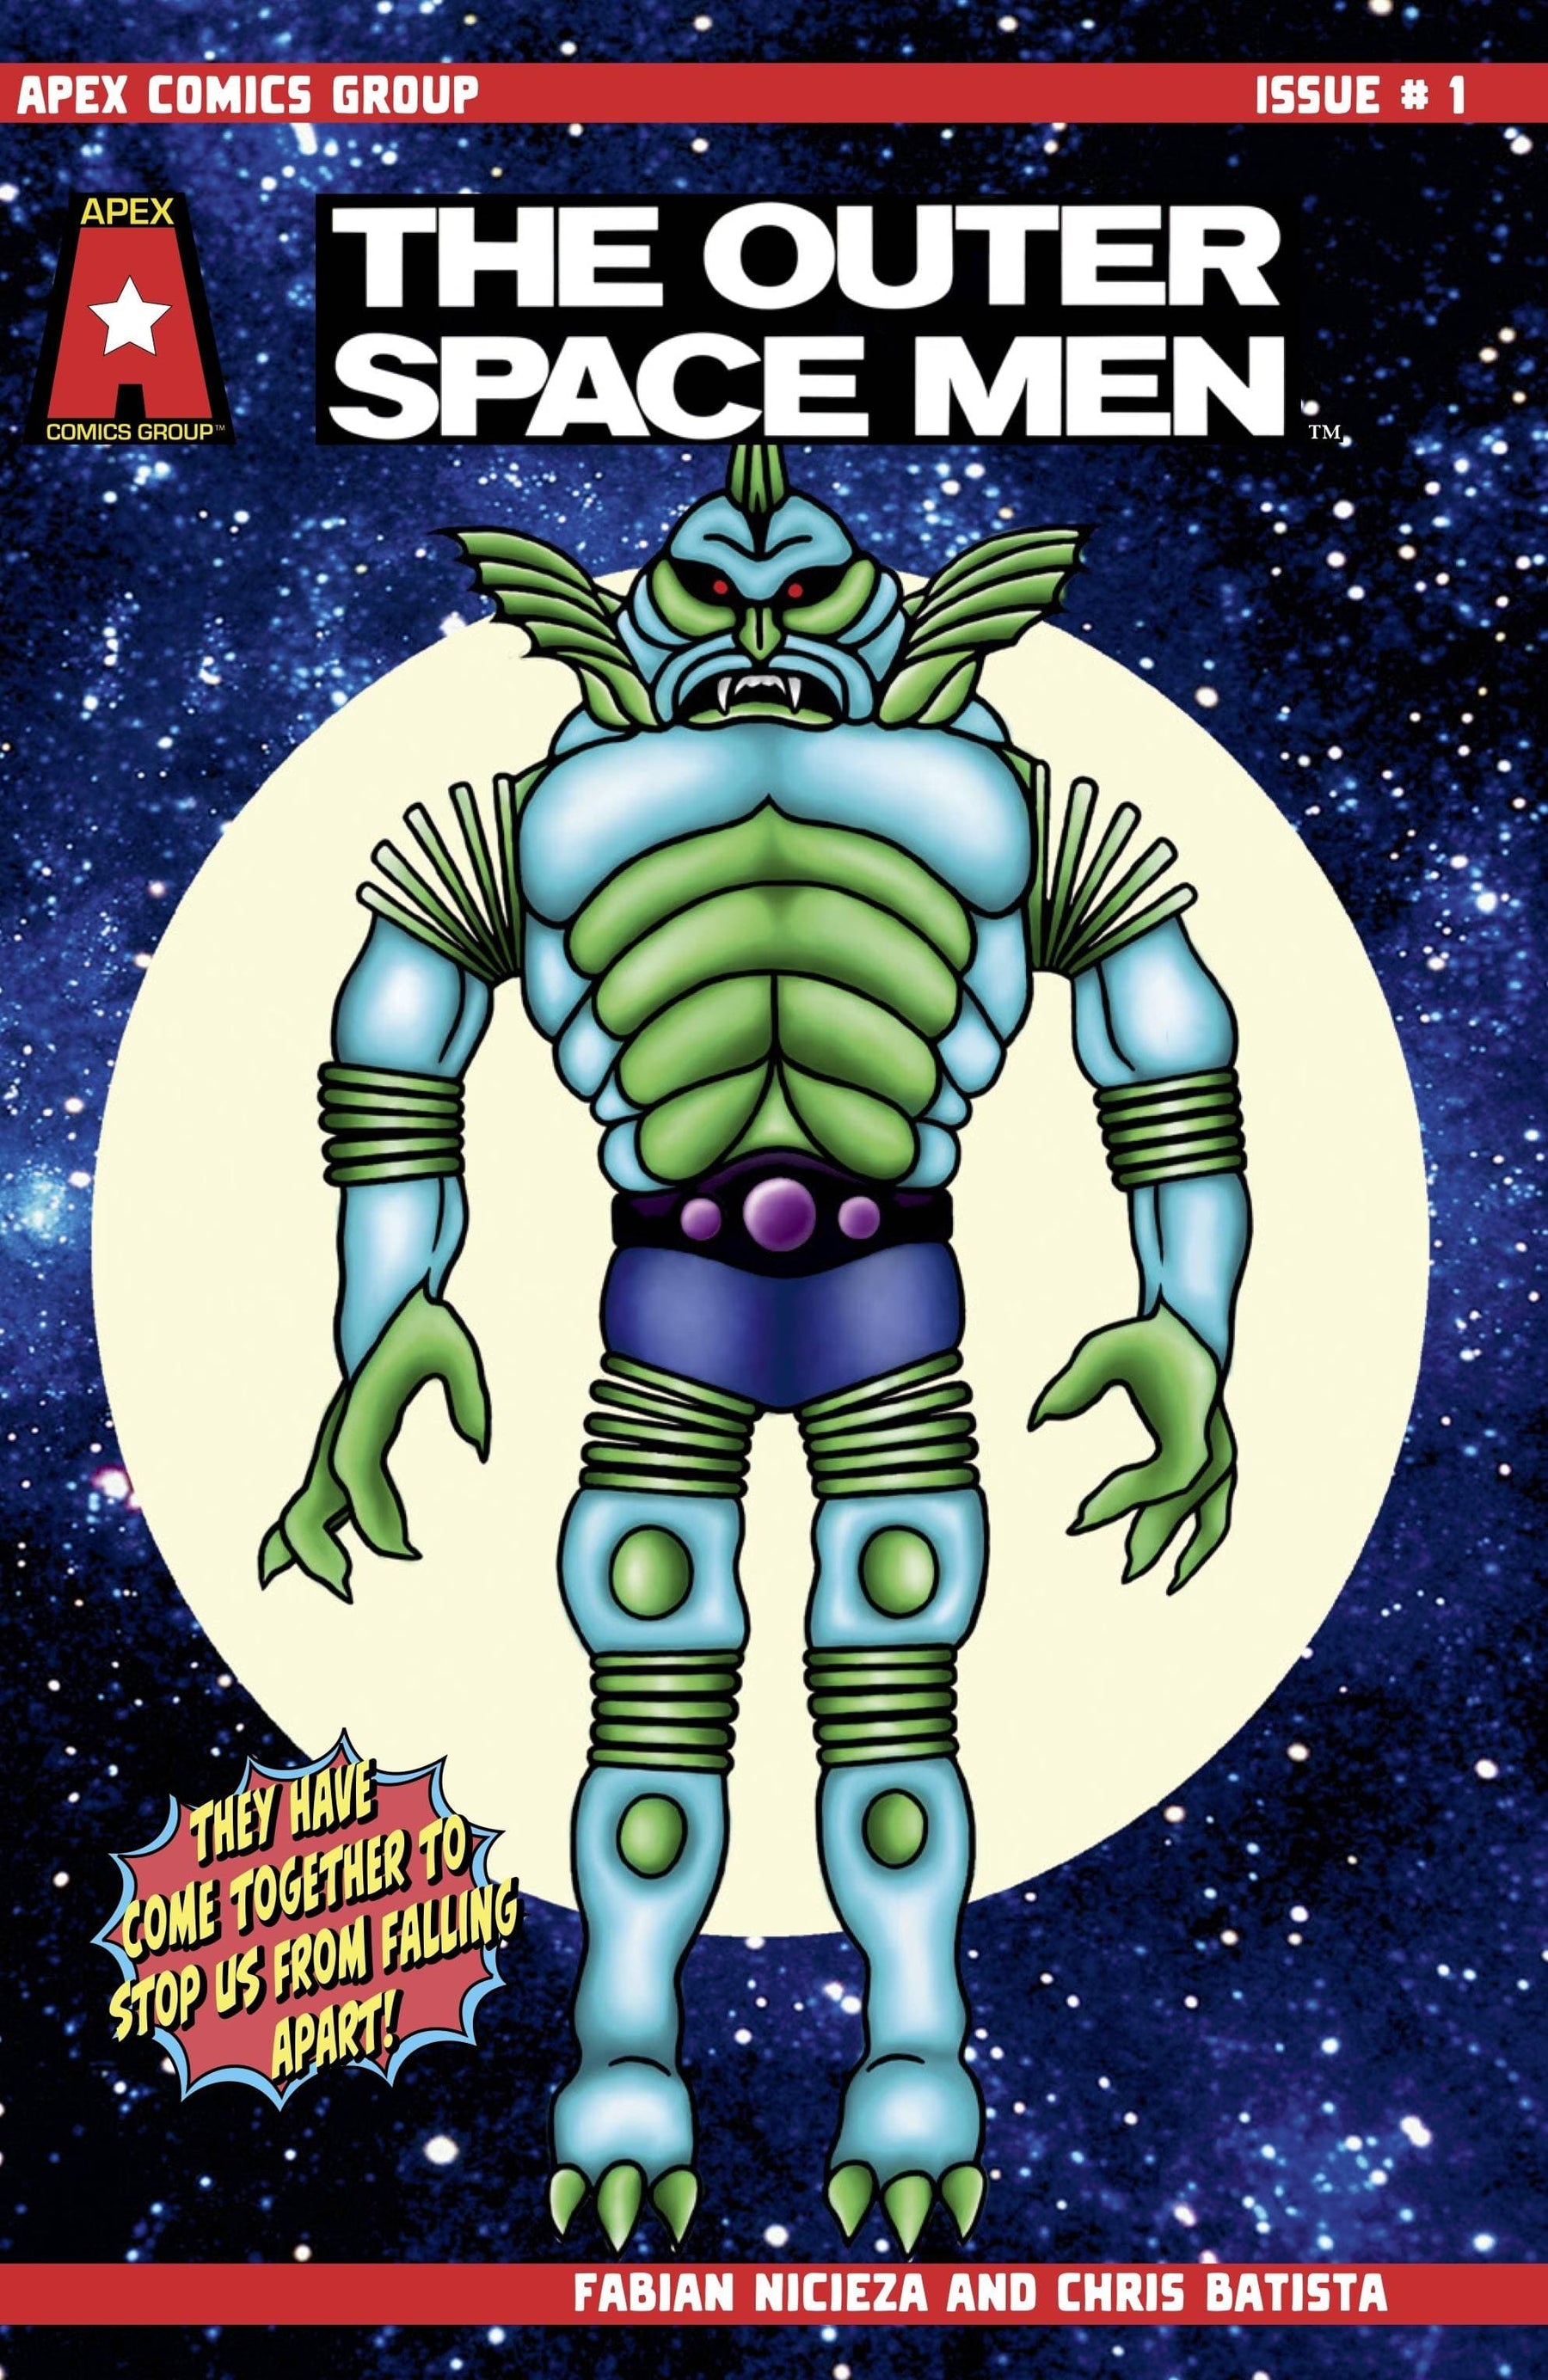 THE OUTER SPACE MEN #1 CVR B COLOSSUS REX